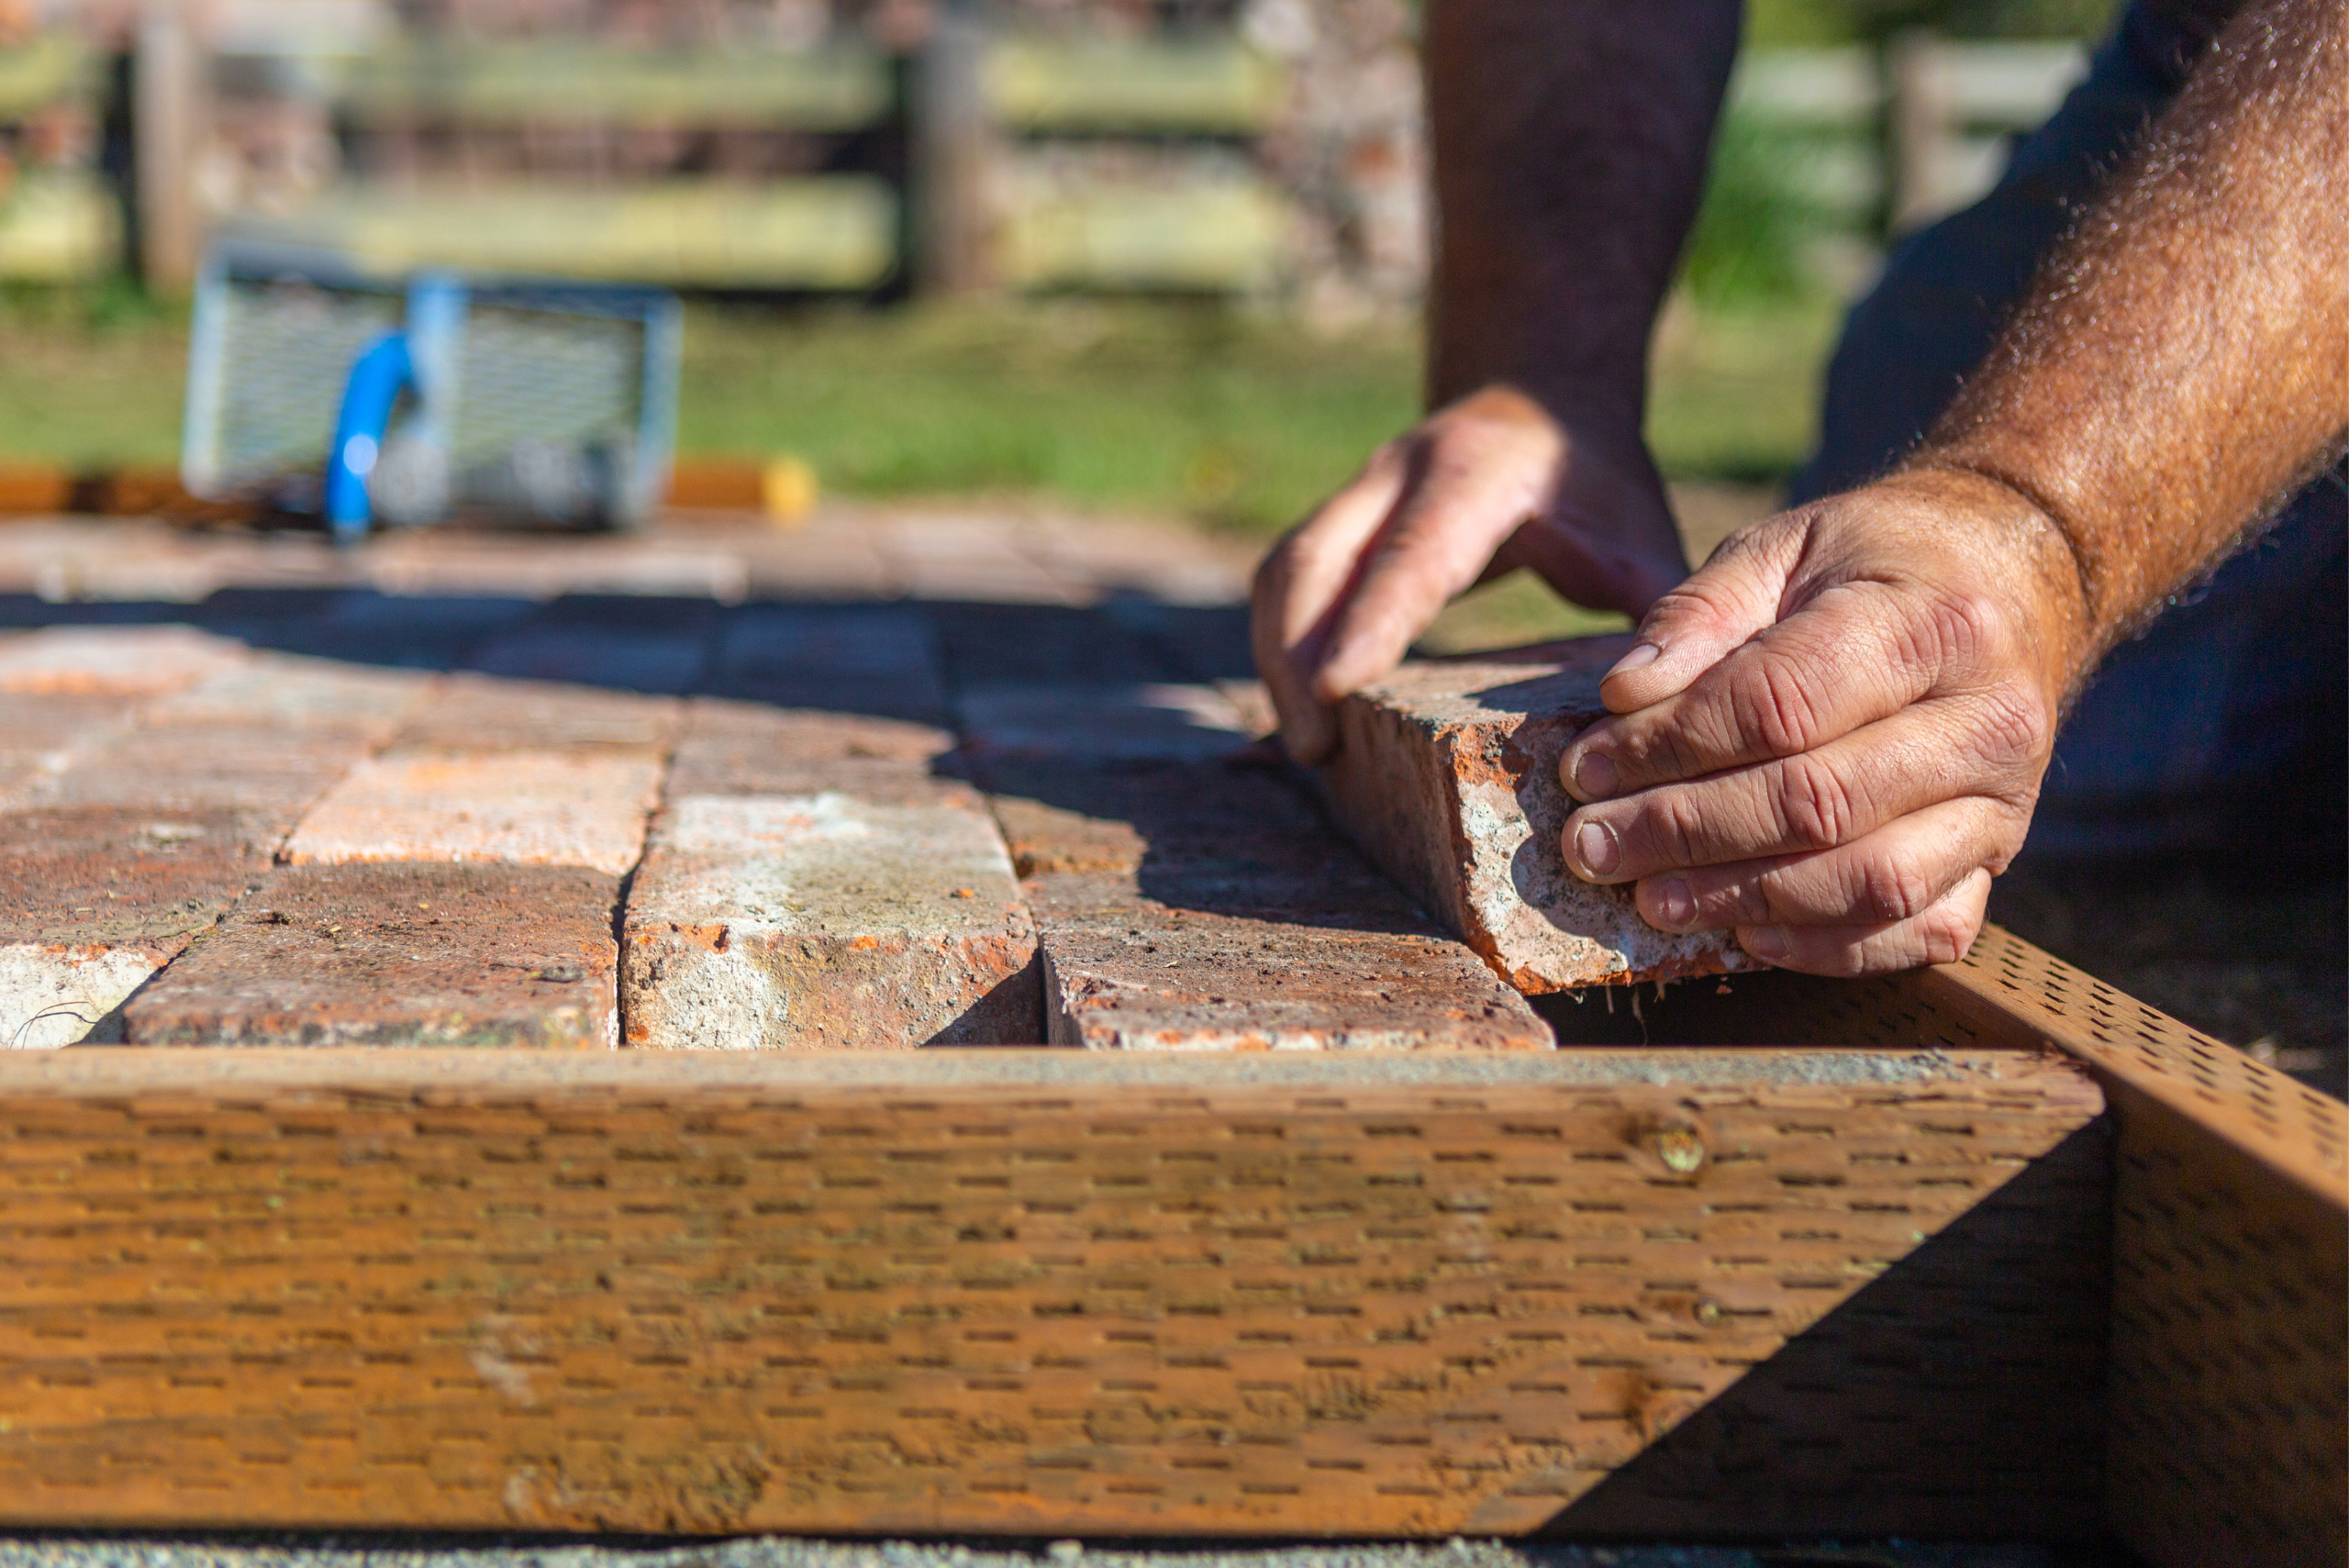 Closeup of someone laying down bricks to build fit pit.